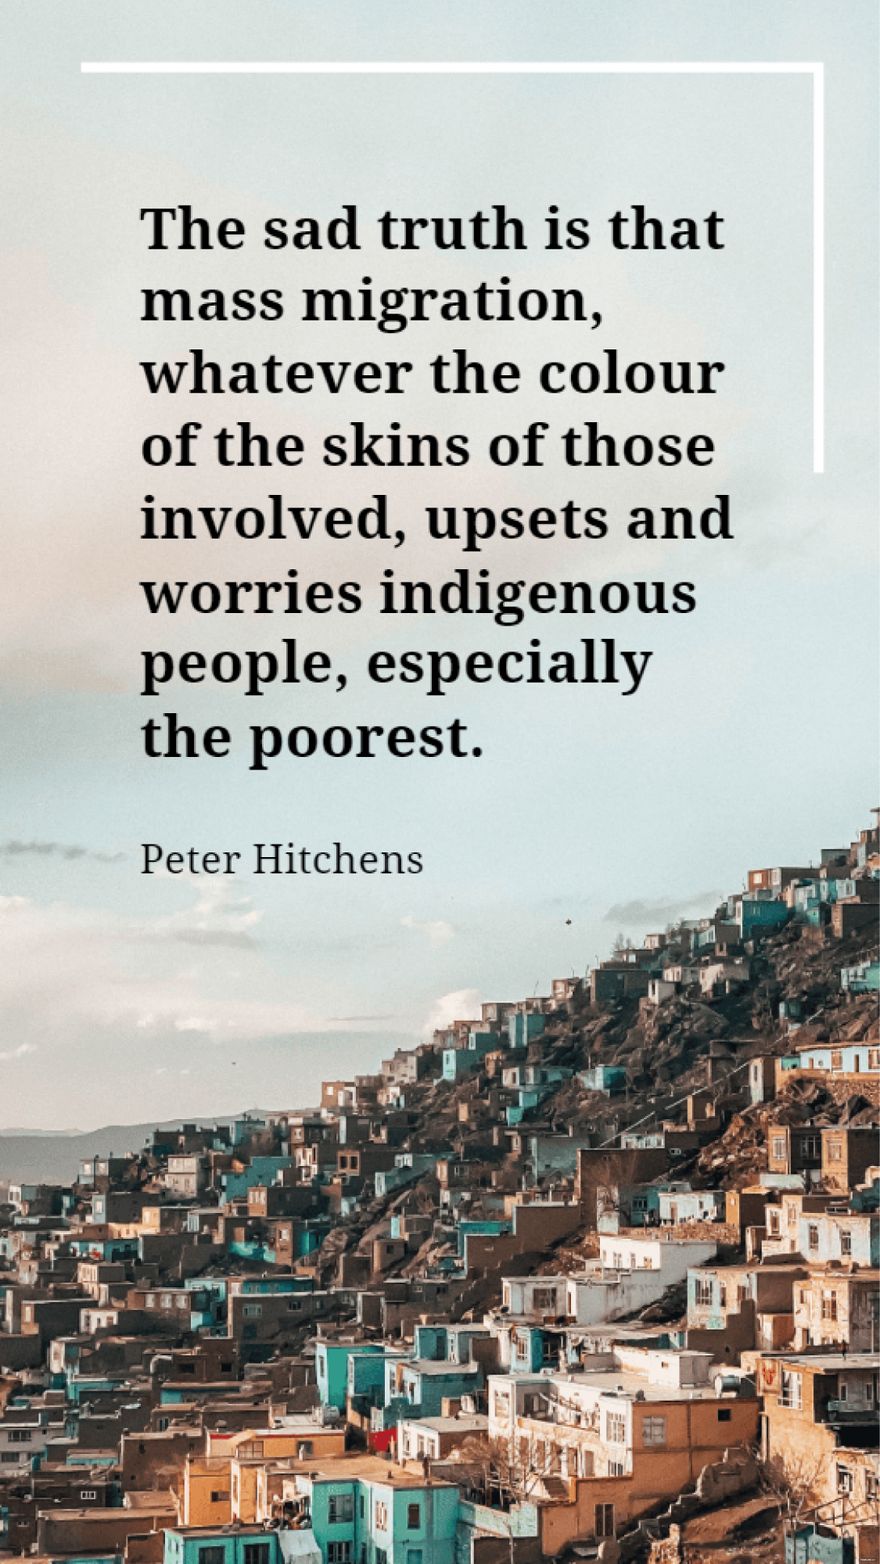 Peter Hitchens - The sad truth is that mass migration, whatever the colour of the skins of those involved, upsets and worries indigenous people, especially the poorest.